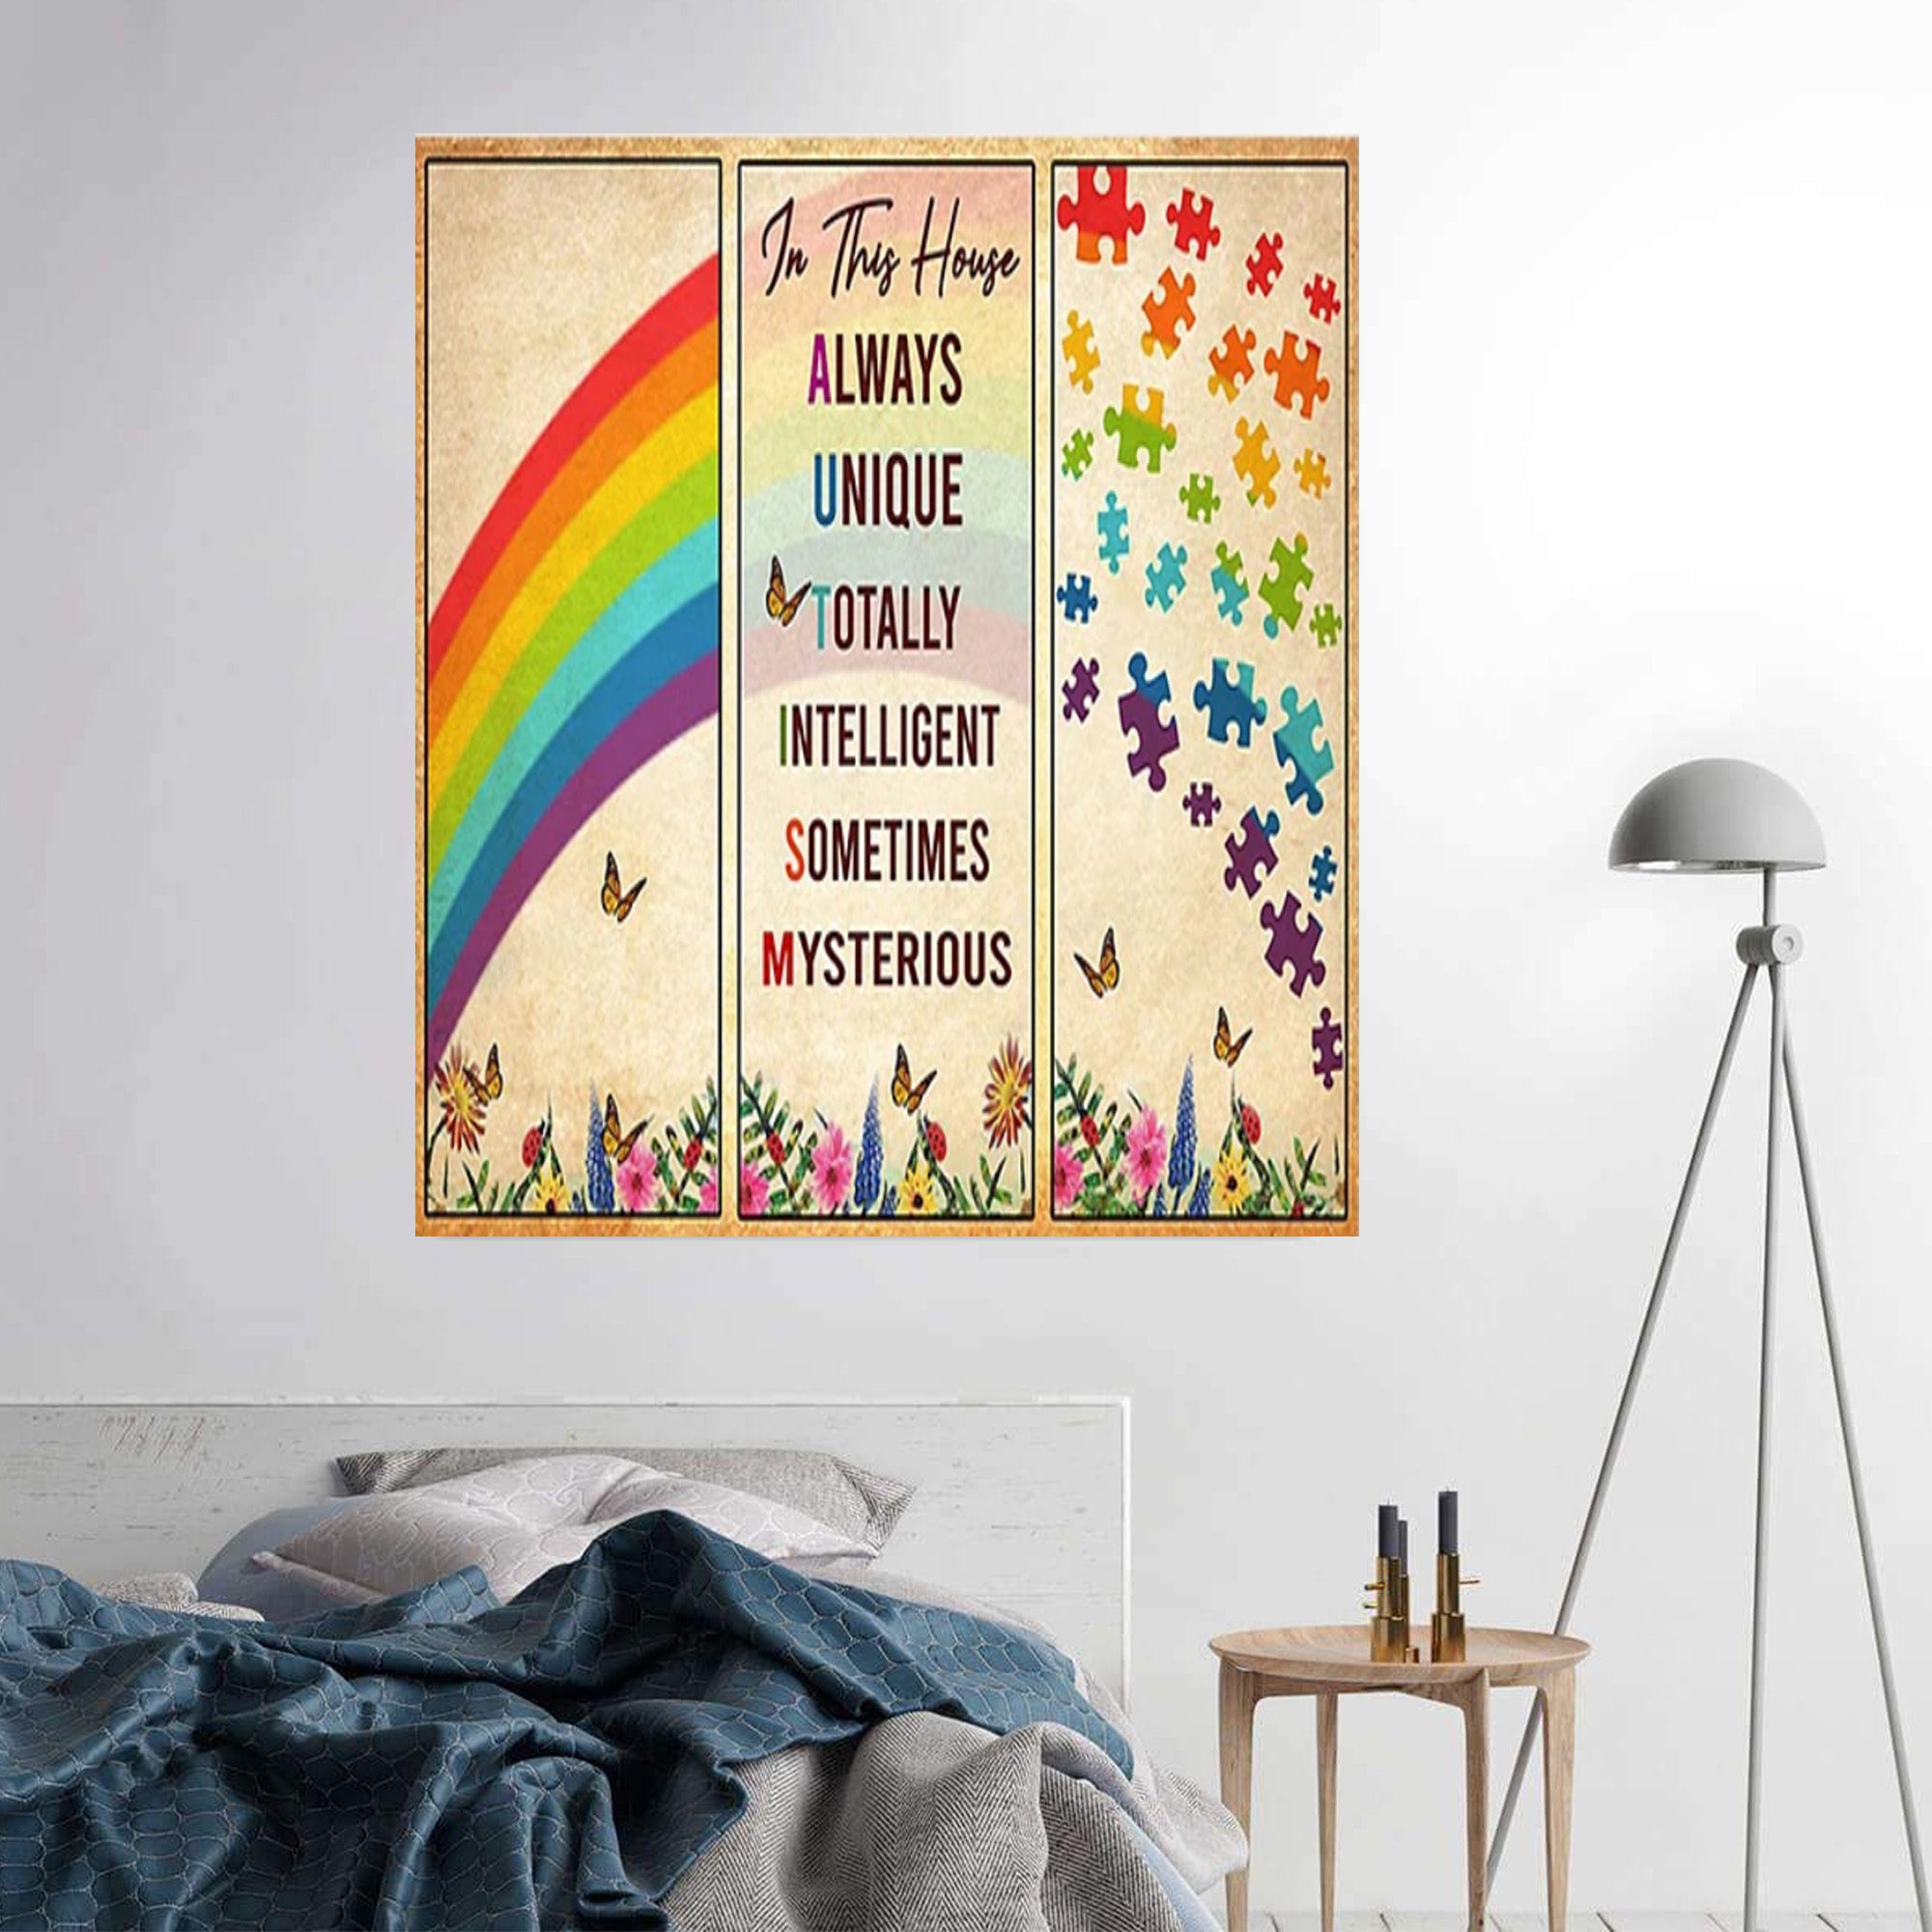 Autism Poster – In This House Always Unique Totally Intelligent Sometimes Mysterious